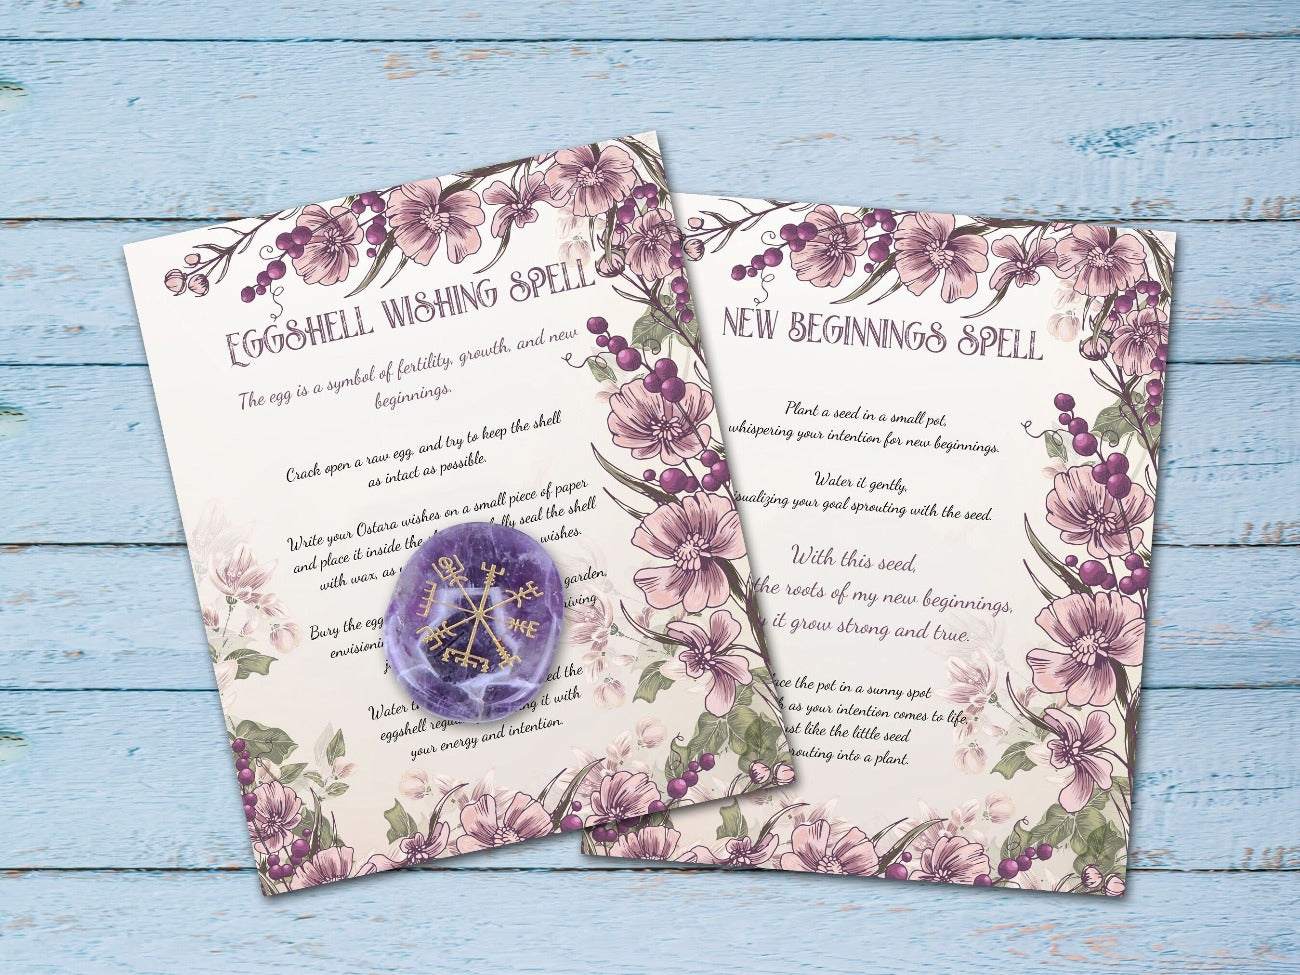 OSTARA SPELL CARDS, Eggshell Wishing Spell and New Beginnings Spell cards placed on a rustic blue wood background - Morgana Magick Spell